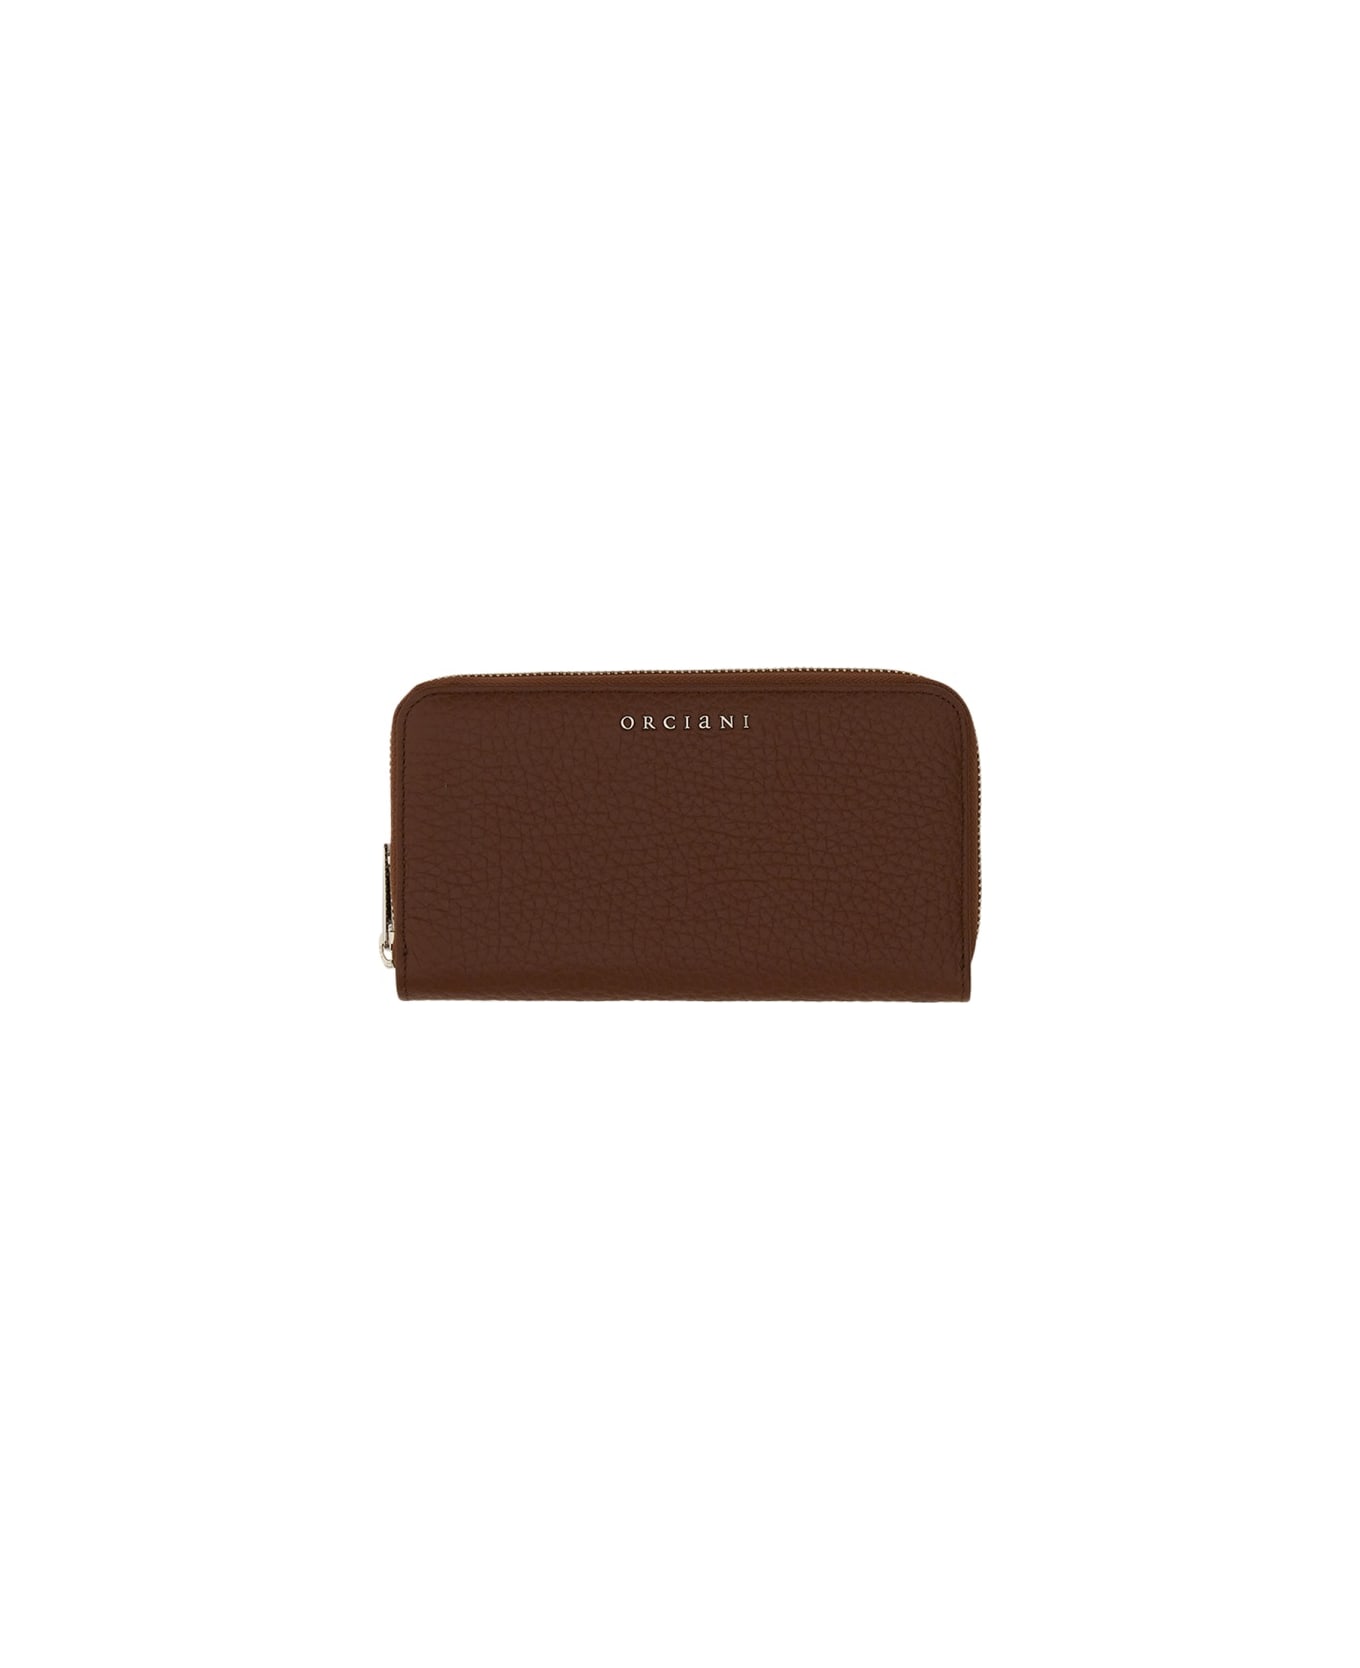 Orciani Soft Leather Wallet - BROWN